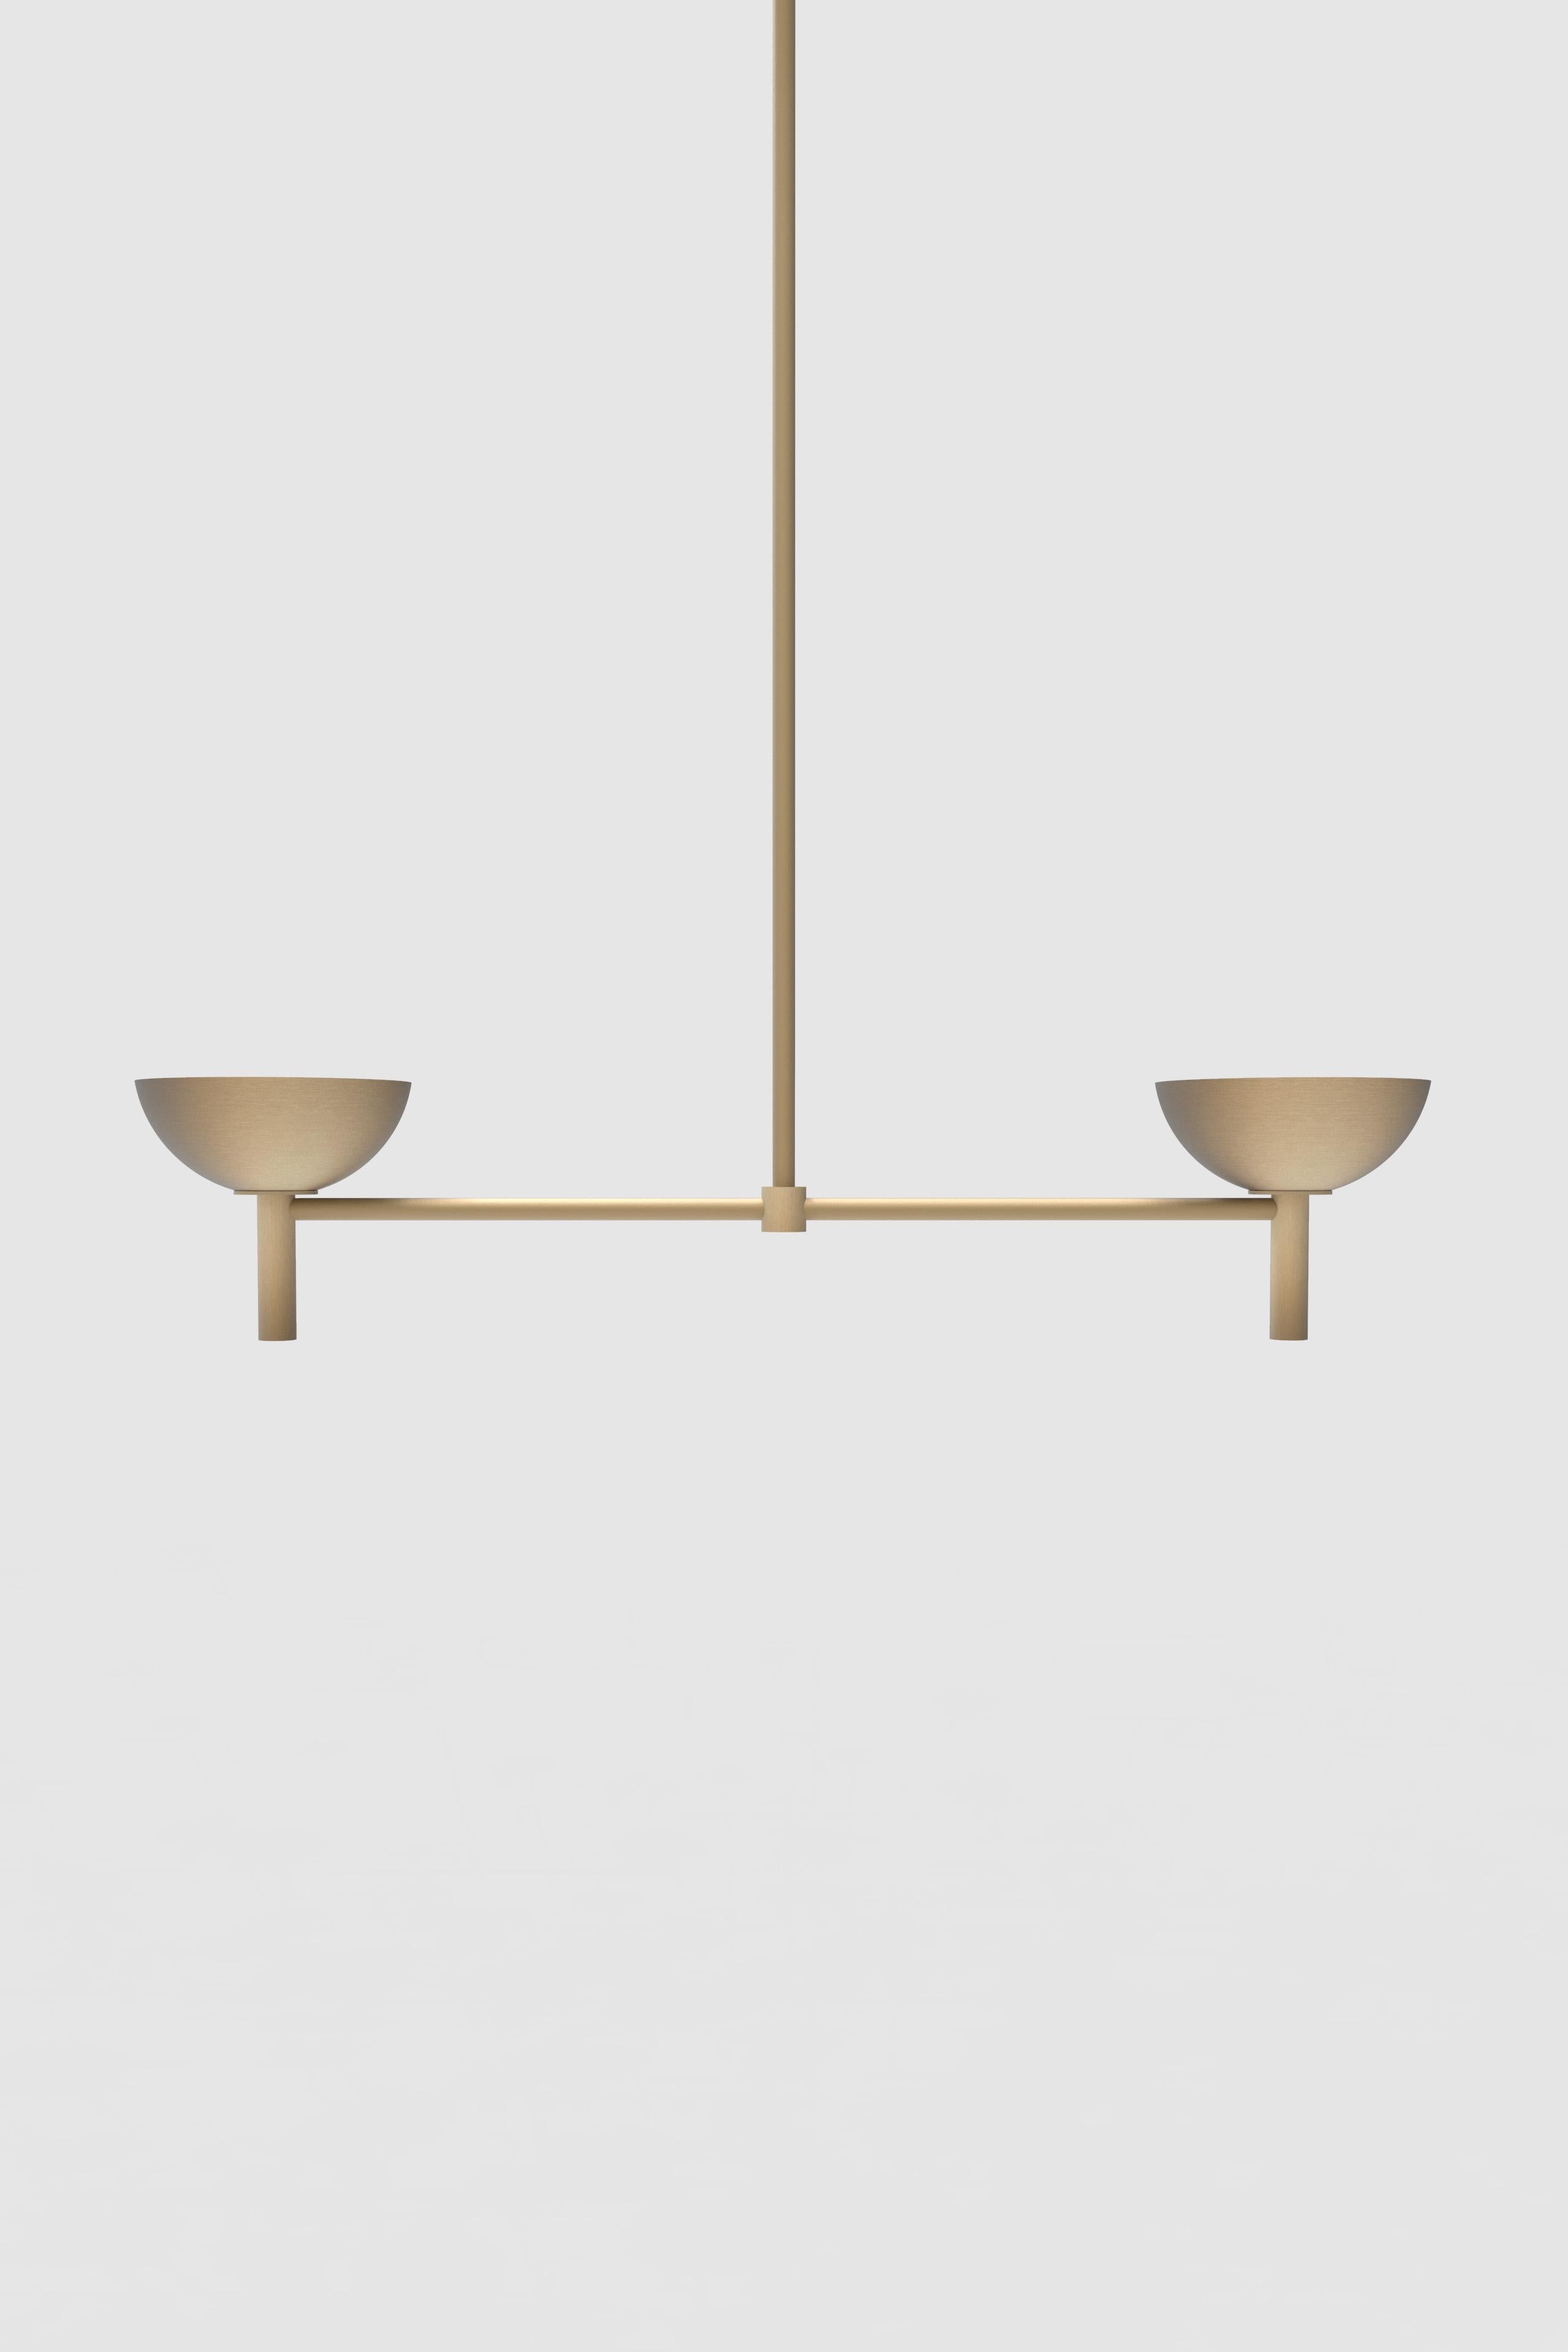 Orphan work 200 Pendant BB
Shown in brushed brass
Available in brushed brass and blackened brass
Measures: 42